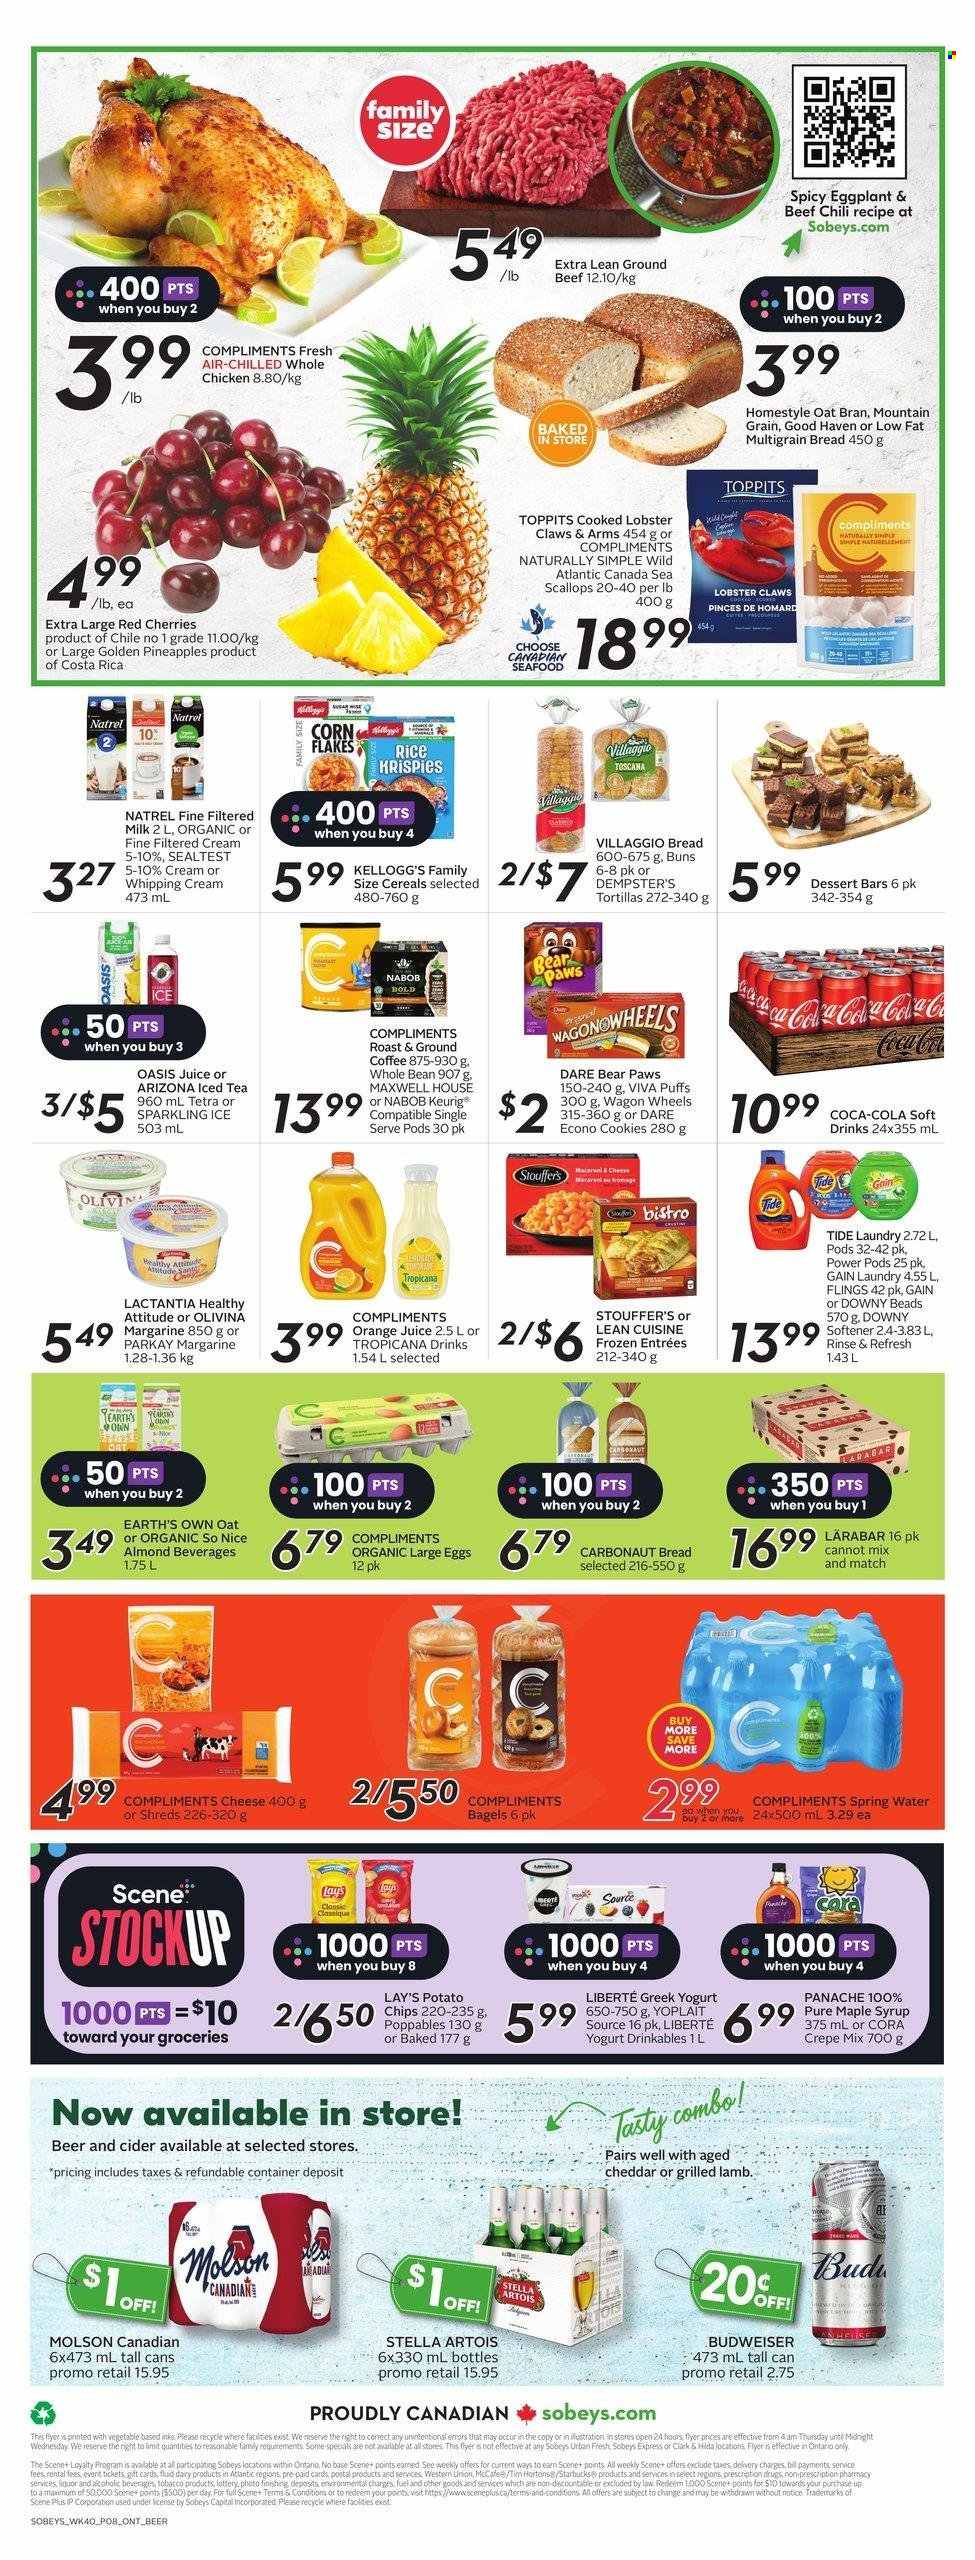 thumbnail - Sobeys Flyer - February 02, 2023 - February 08, 2023 - Sales products - bagels, bread, multigrain bread, tortillas, puffs, corn, eggplant, pineapple, cherries, lobster, scallops, seafood, Lean Cuisine, greek yoghurt, yoghurt, Yoplait, milk, large eggs, margarine, whipping cream, Stouffer's, cookies, Kellogg's, potato chips, Lay’s, Rice Krispies, maple syrup, syrup, Coca-Cola, orange juice, juice, ice tea, soft drink, AriZona, spring water, Maxwell House, coffee, ground coffee, Starbucks, Keurig, So Nice, cider, beer, Stella Artois, whole chicken, chicken, beef meat, ground beef, Gain, Tide, fabric softener, Downy Laundry, Paws, container, Budweiser. Page 2.